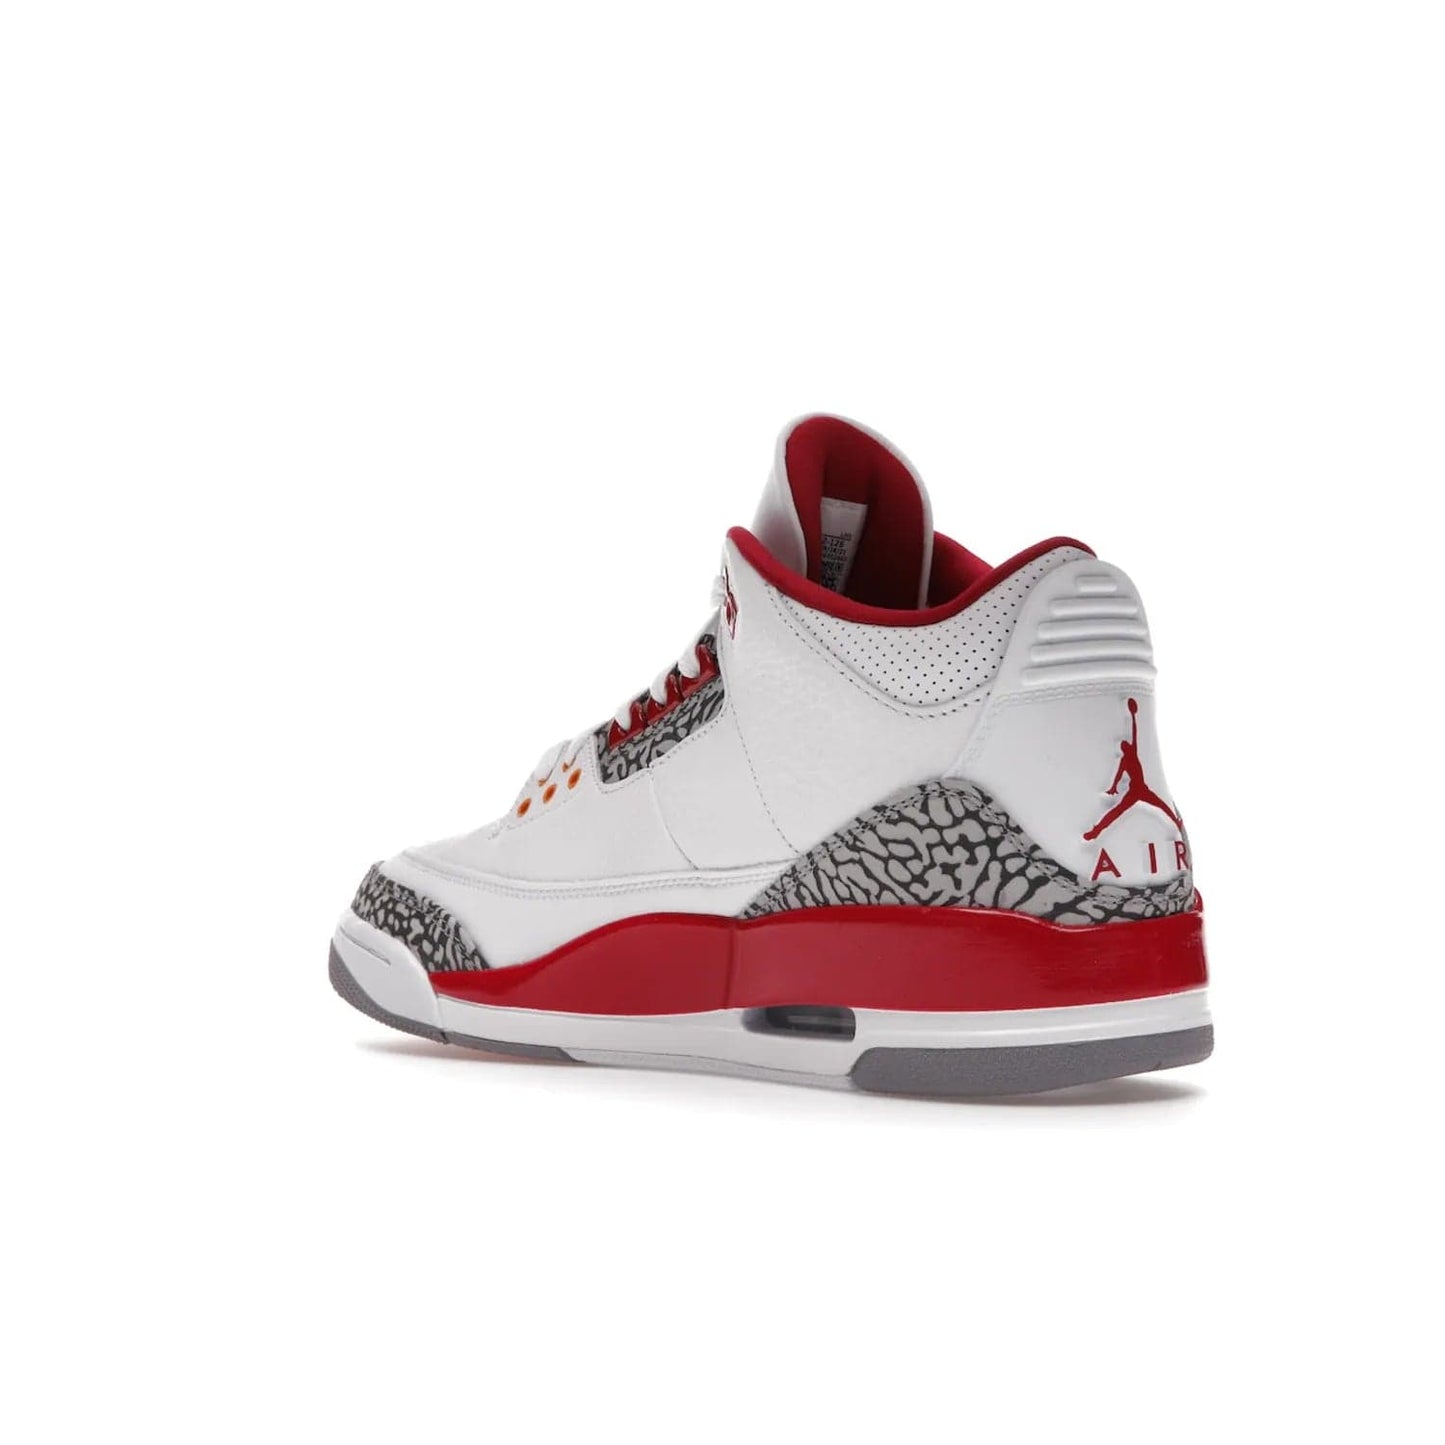 Jordan 3 Retro Cardinal Red - Image 24 - Only at www.BallersClubKickz.com - Air Jordan 3 Retro Cardinal Red combines classic style and modern appeal - white tumbled leather, signature Elephant Print overlays, cardinal red midsoles, Jumpman logo embroidery. Available Feb 2022.